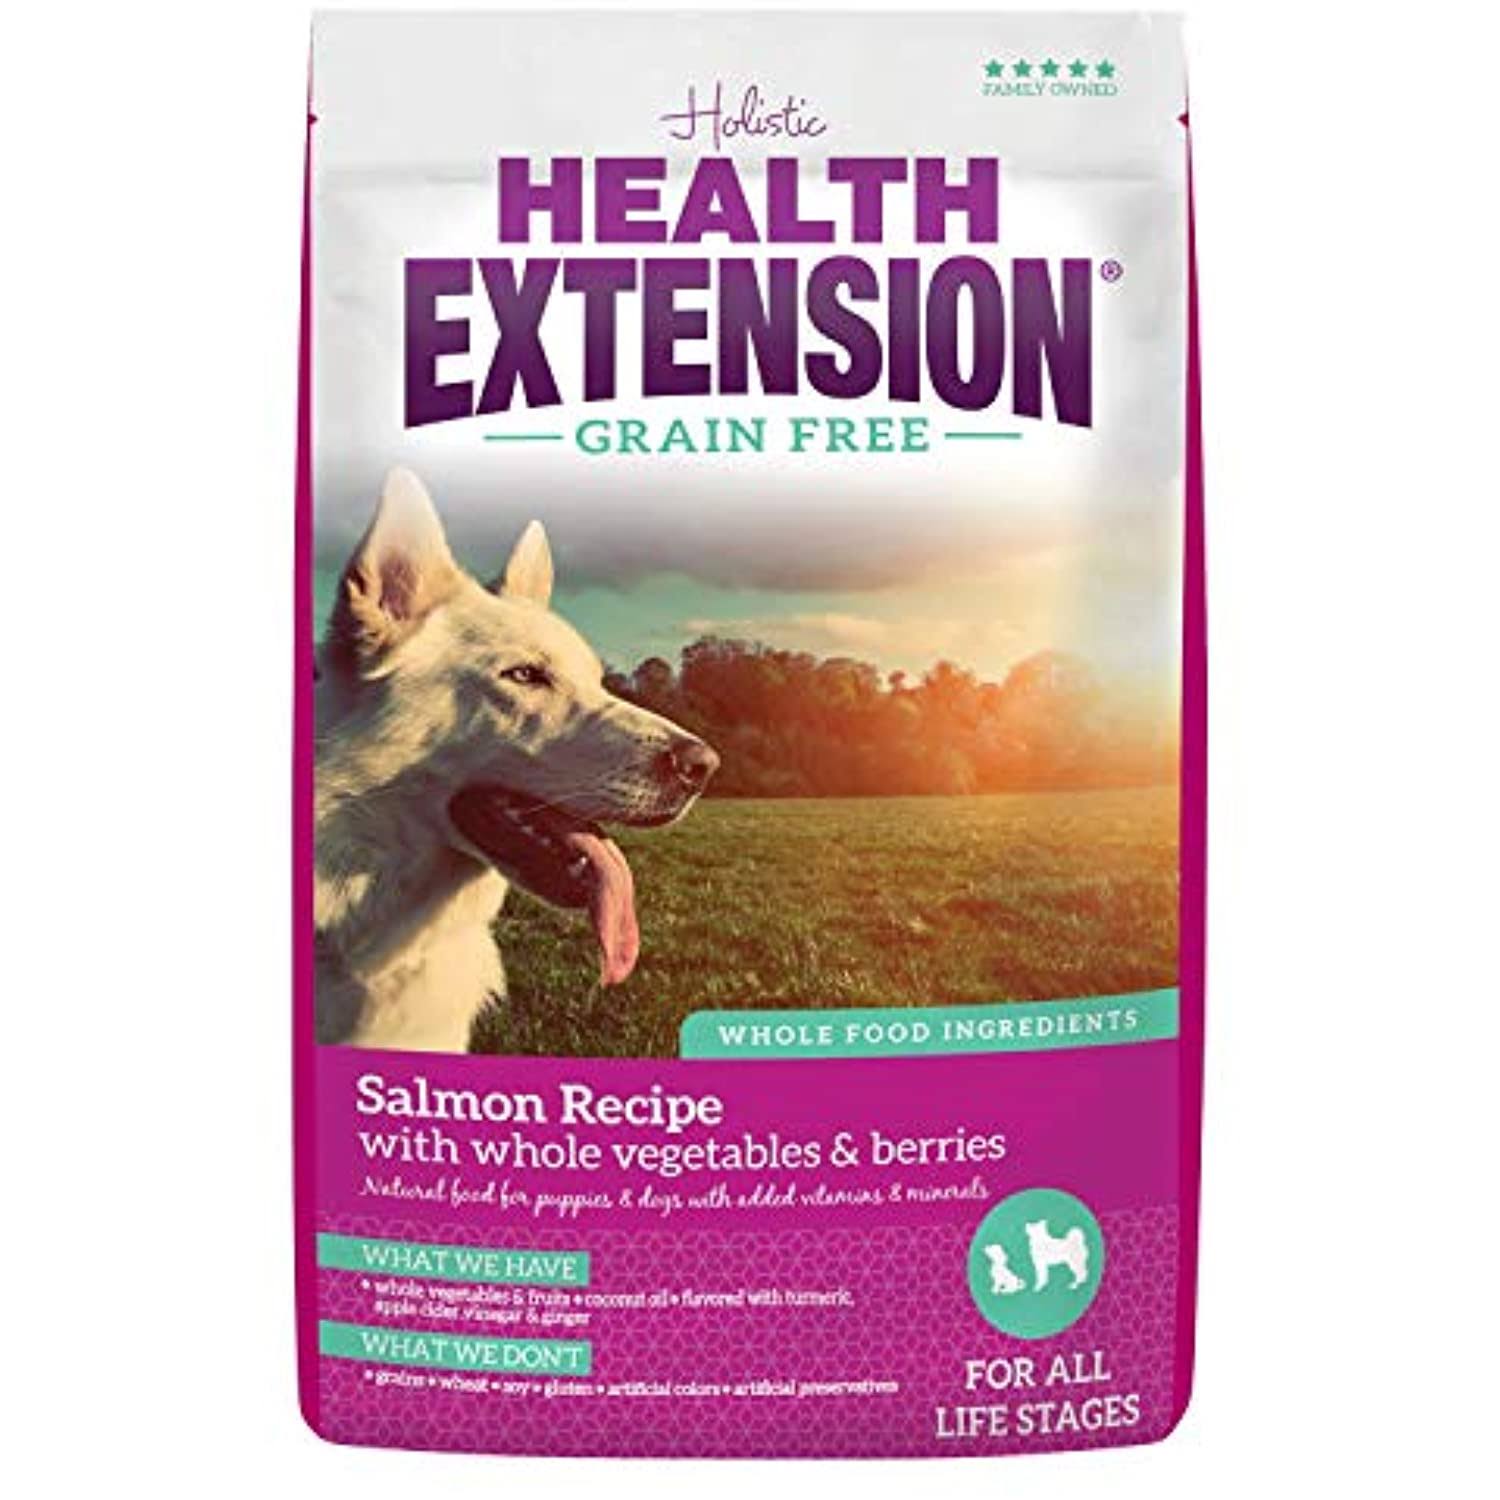 Health Extension Grain Free Herring and Chickpea Pet Food Formula - 23.5lb, Salmon